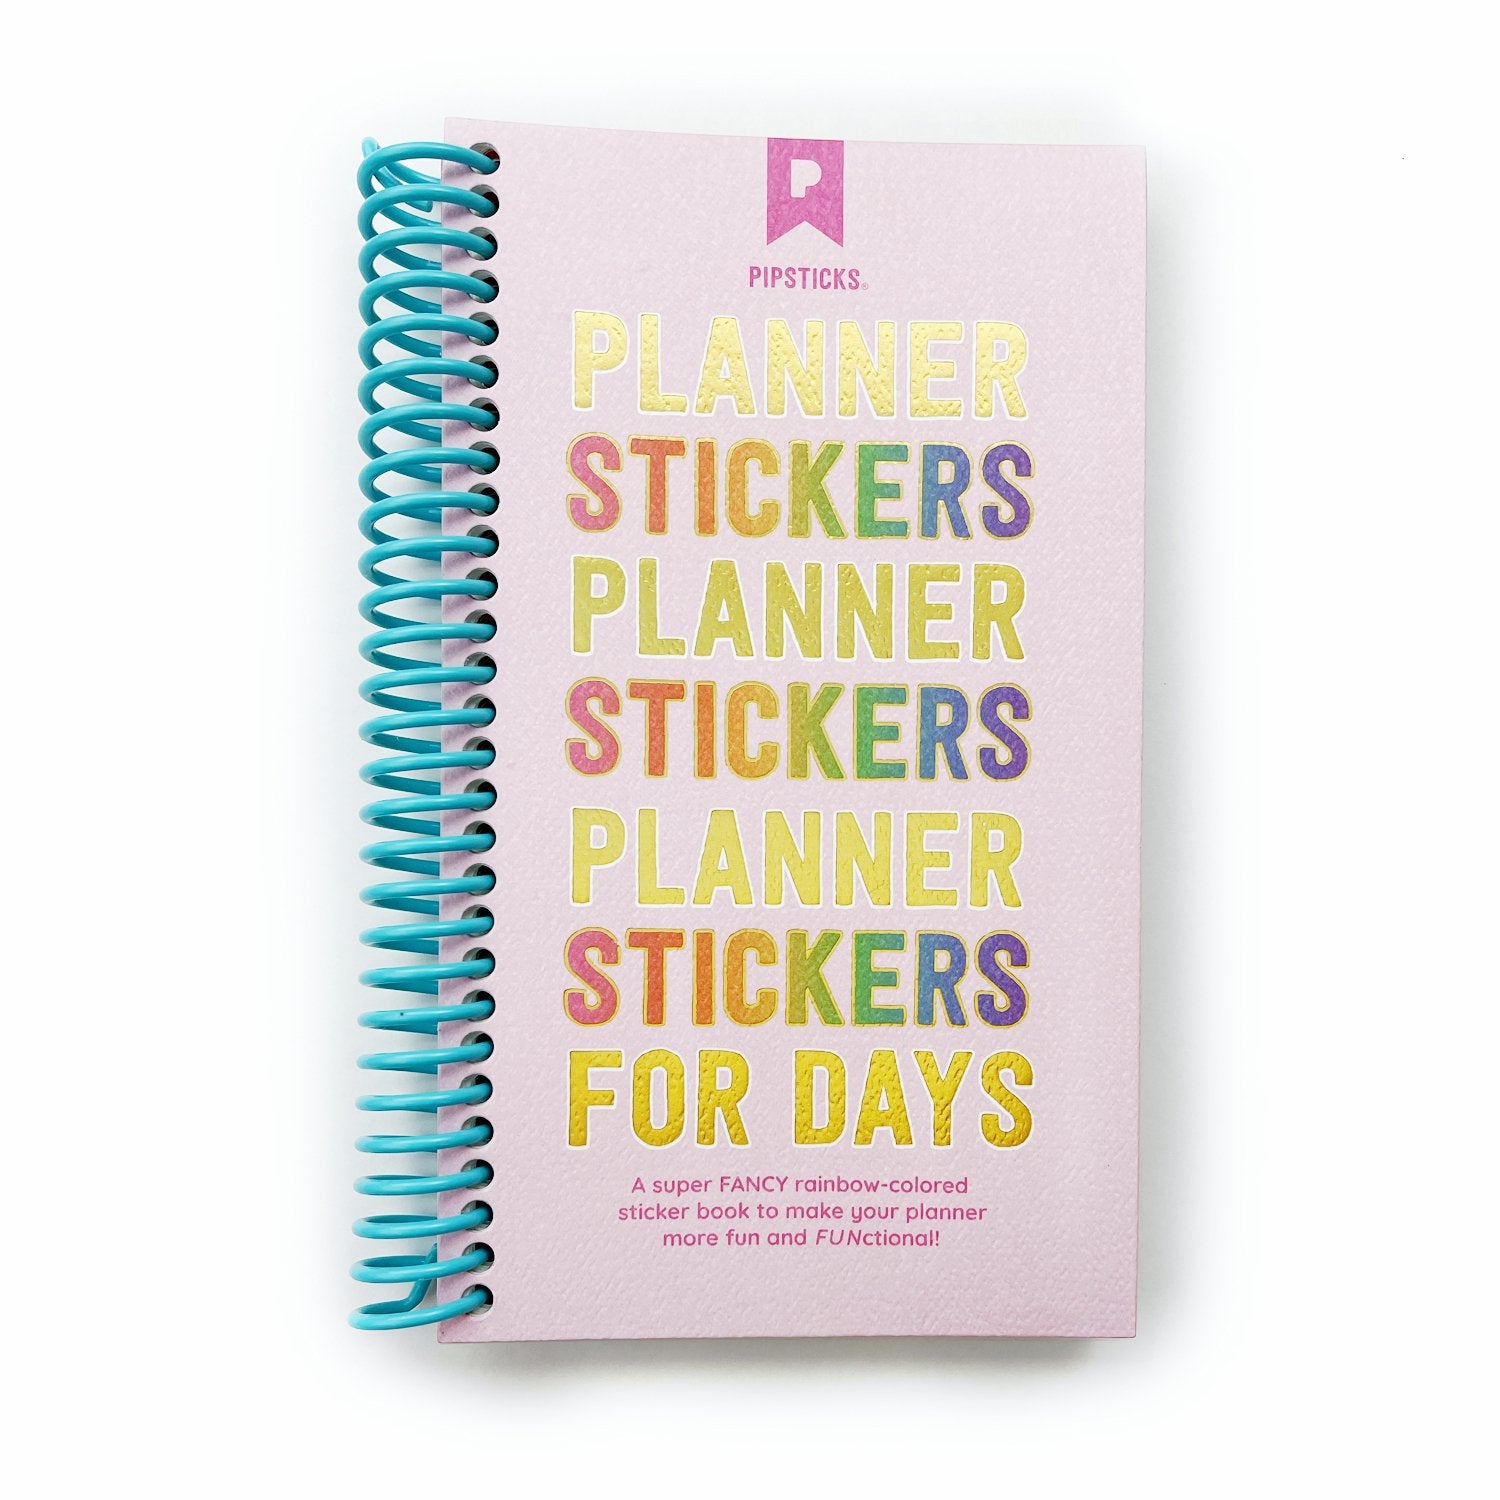 91 Sticker Albums and Collections ideas